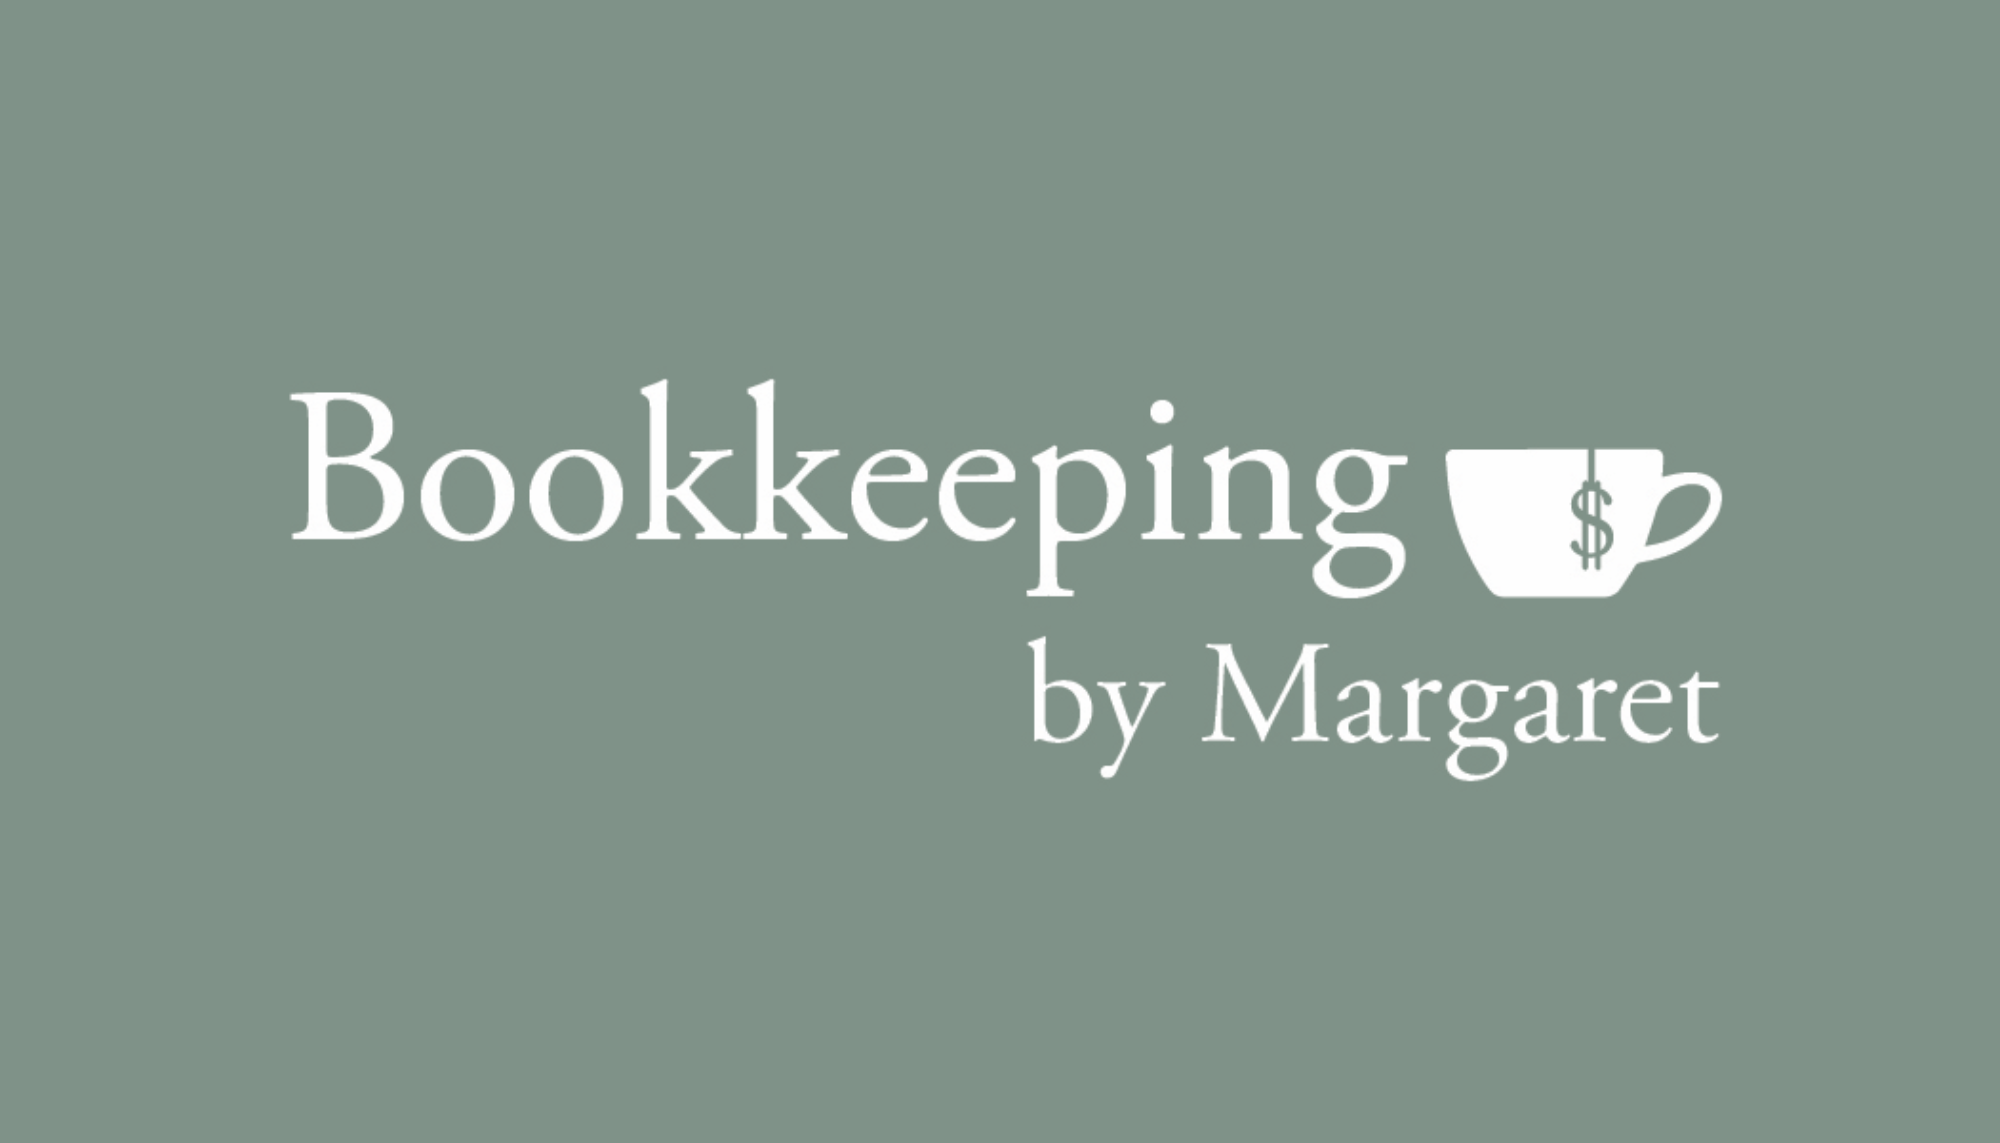 Bookkeeping by Margaret